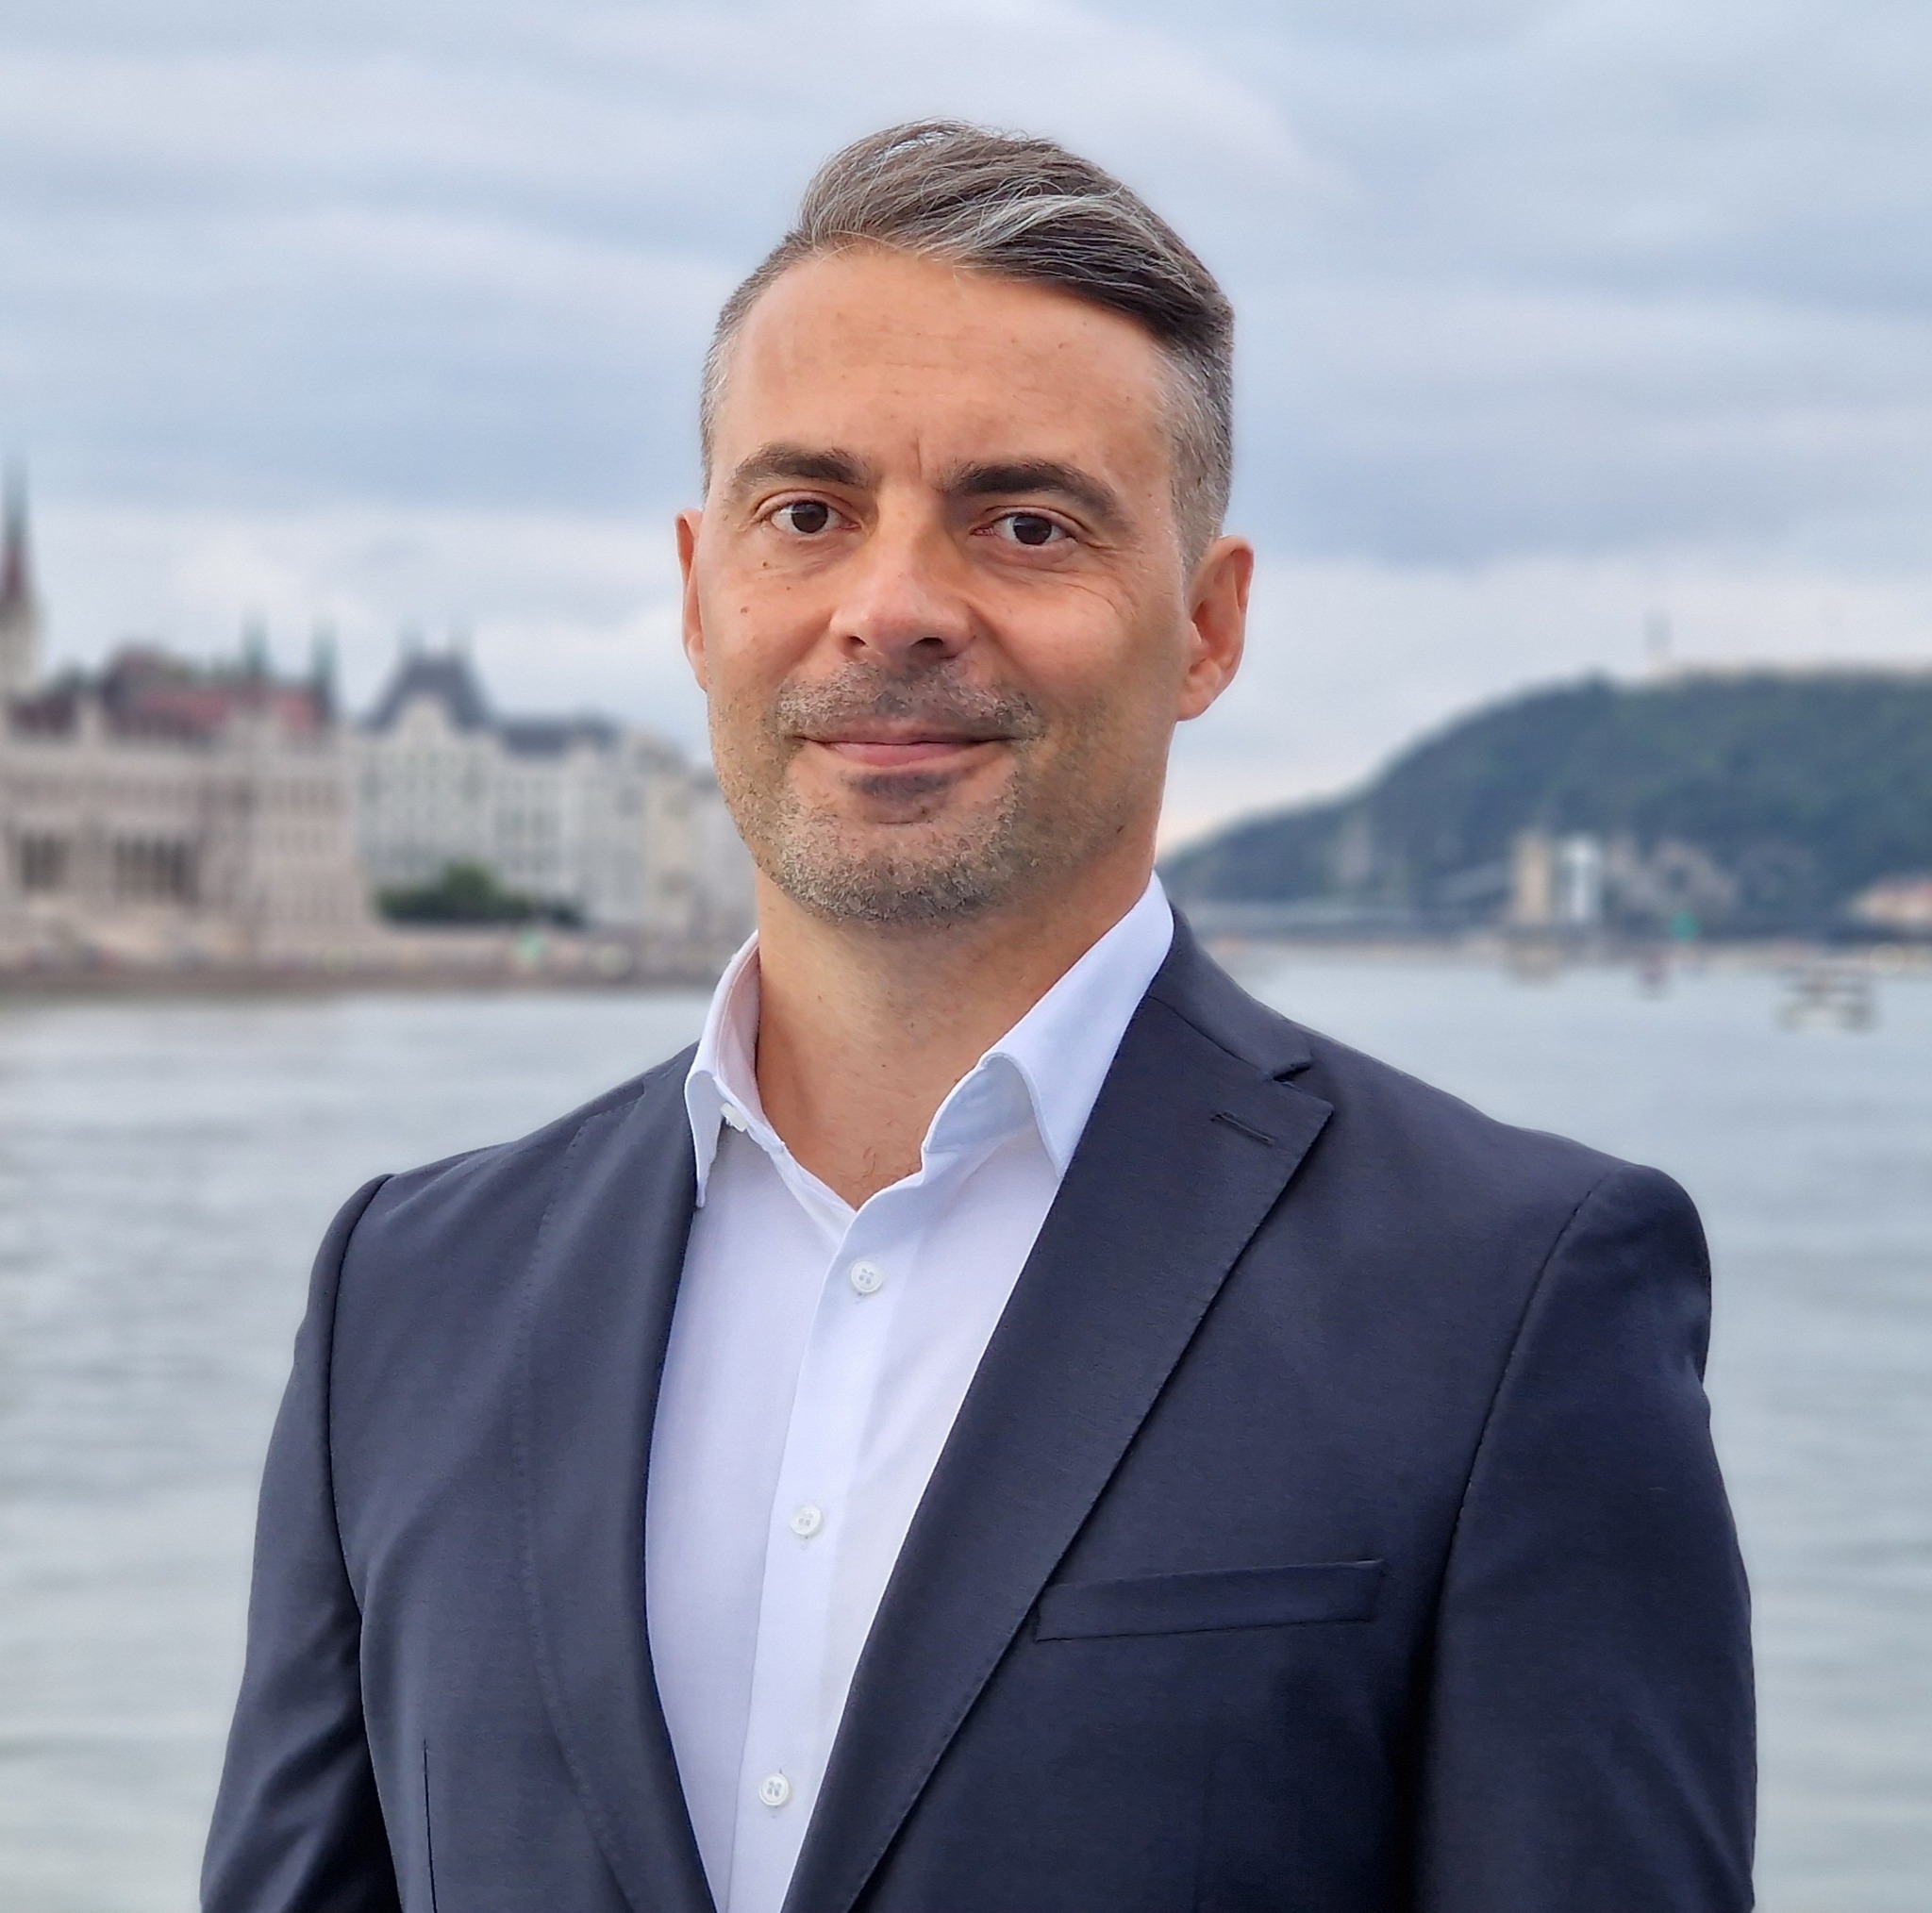 Former Jobbik Leader Vona to Launch New Party in Hungary